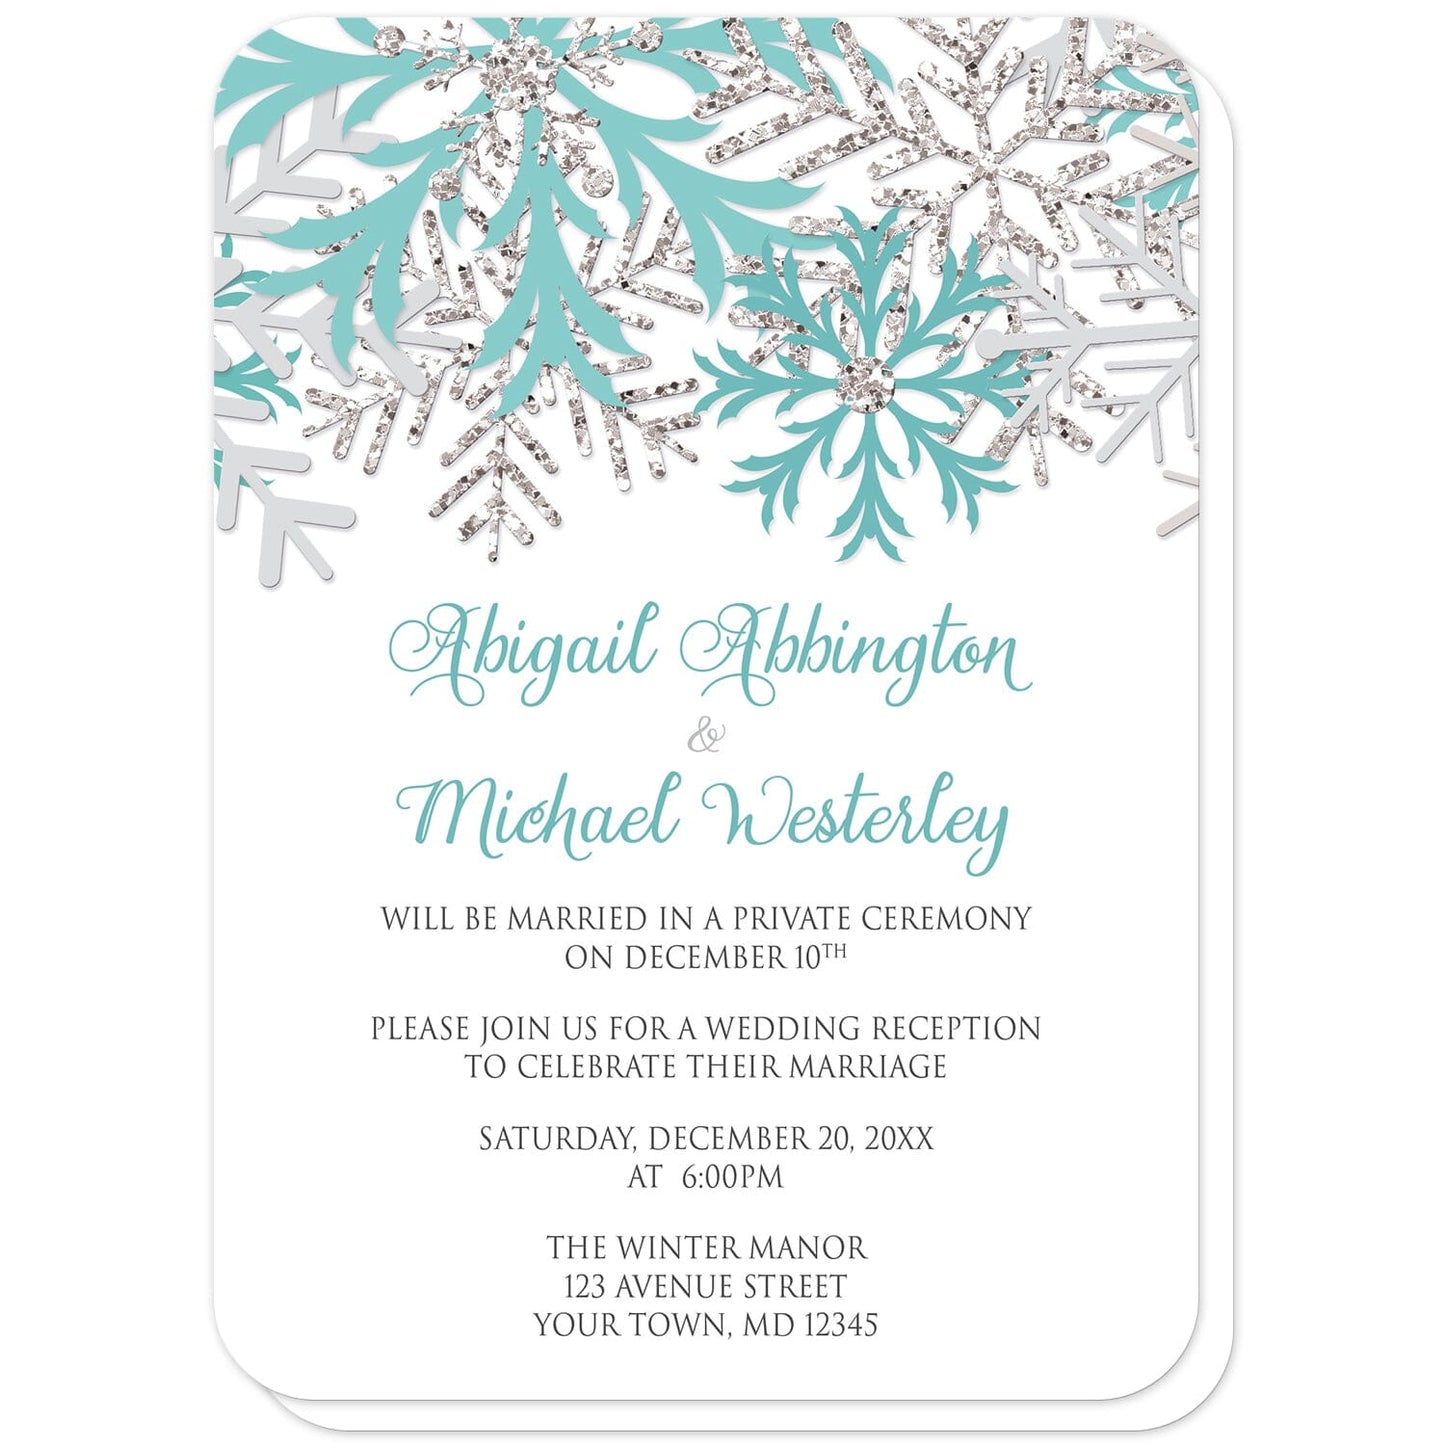 Winter Teal Silver Snowflake Reception Only Invitations (with rounded corners) at Artistically Invited. Beautiful winter teal silver snowflake reception only invitations designed with teal, light teal, silver-colored glitter-illustrated, and light gray snowflakes along the top over a white background. Your personalized post-wedding reception details are custom printed in teal and gray below the pretty snowflakes.